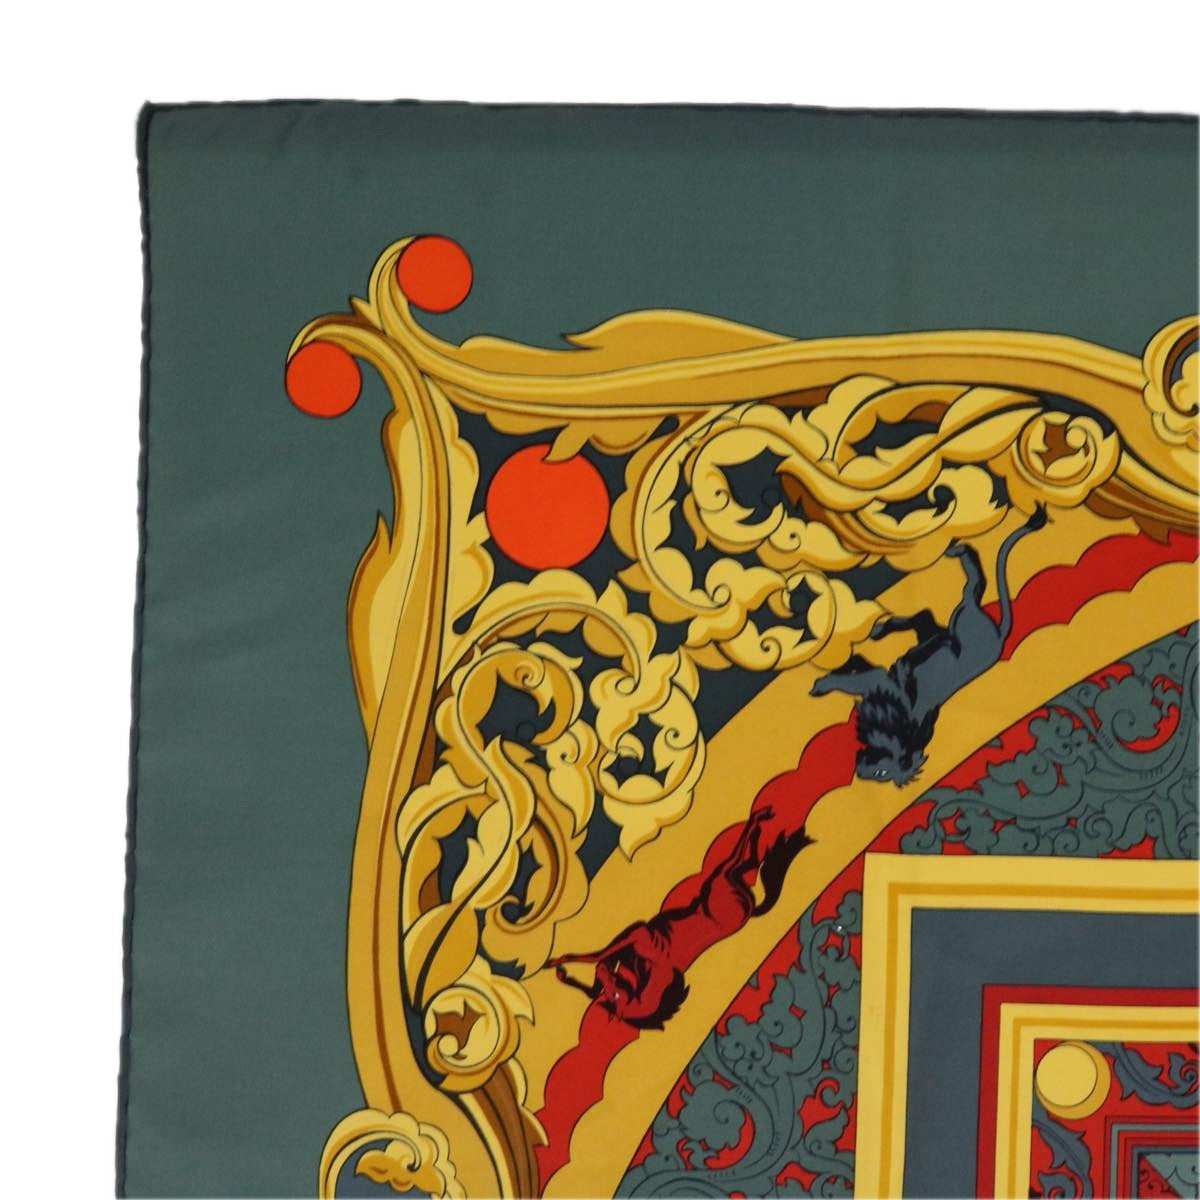 HERMES Carre 90 ANIMAUX SOLAIRES Scarf Silk Orange Auth bs11423 - 0